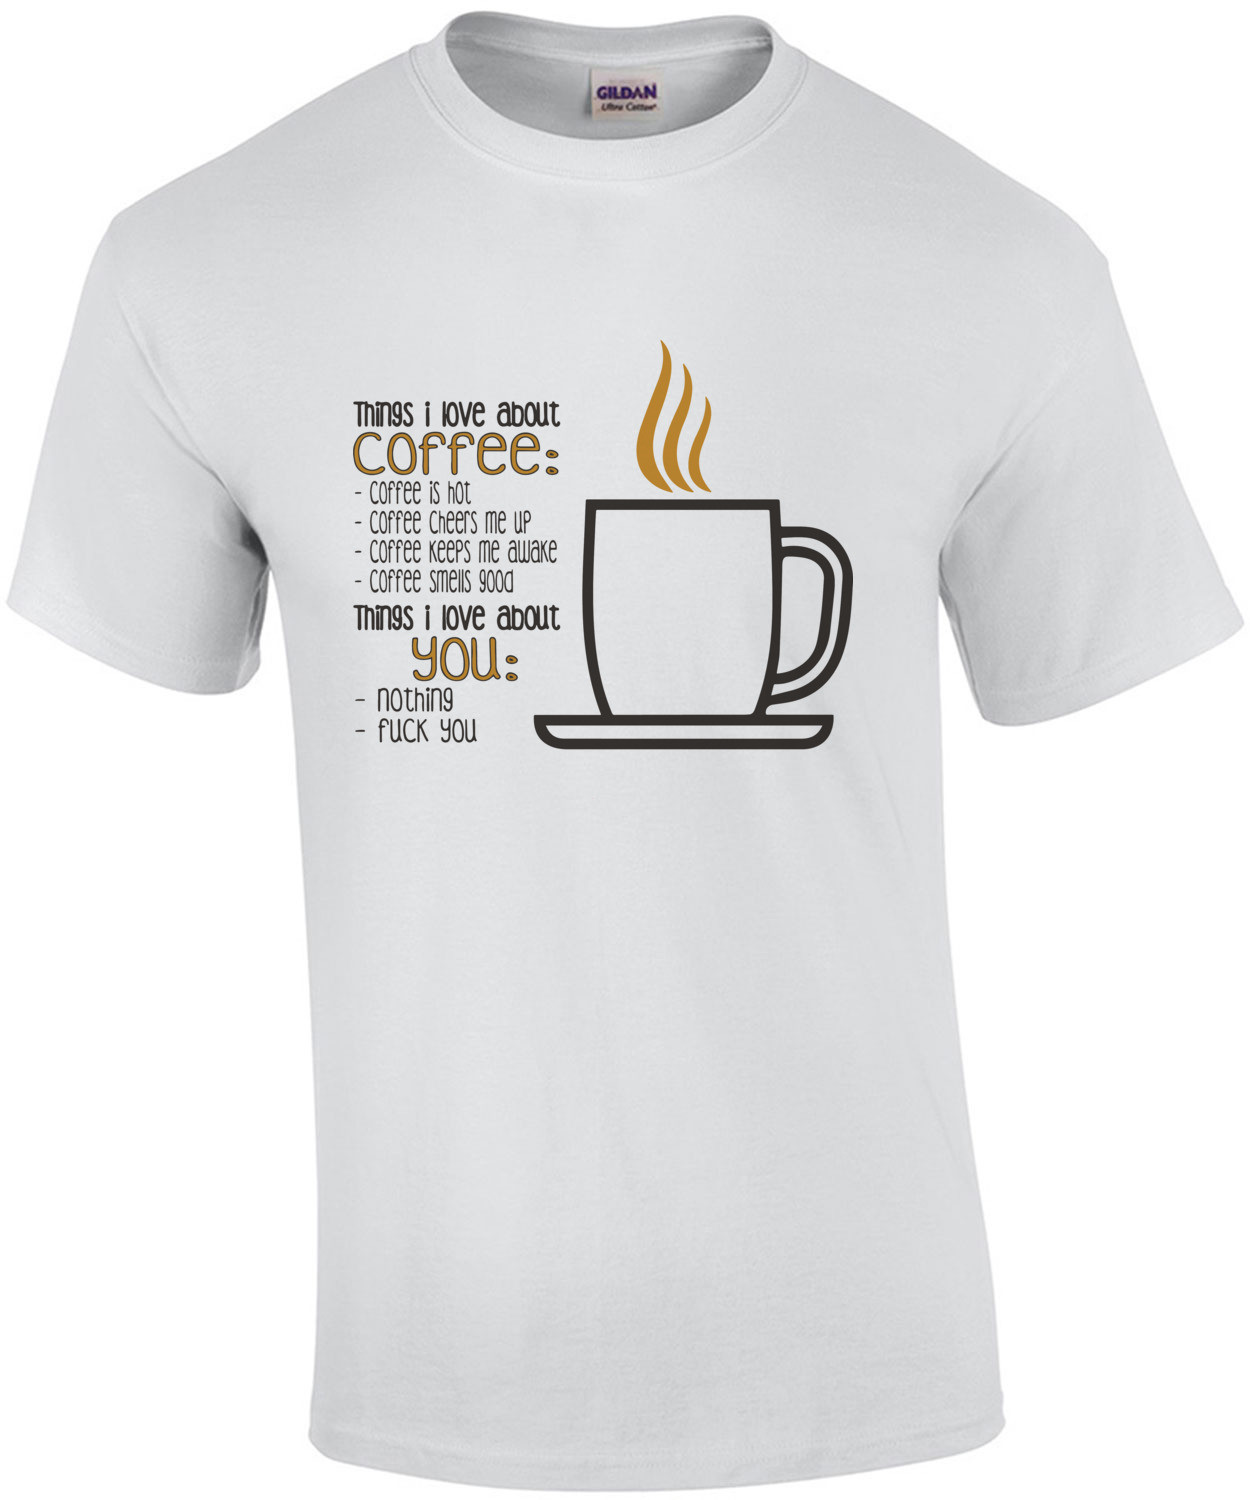 Things i love about coffee t-shirt